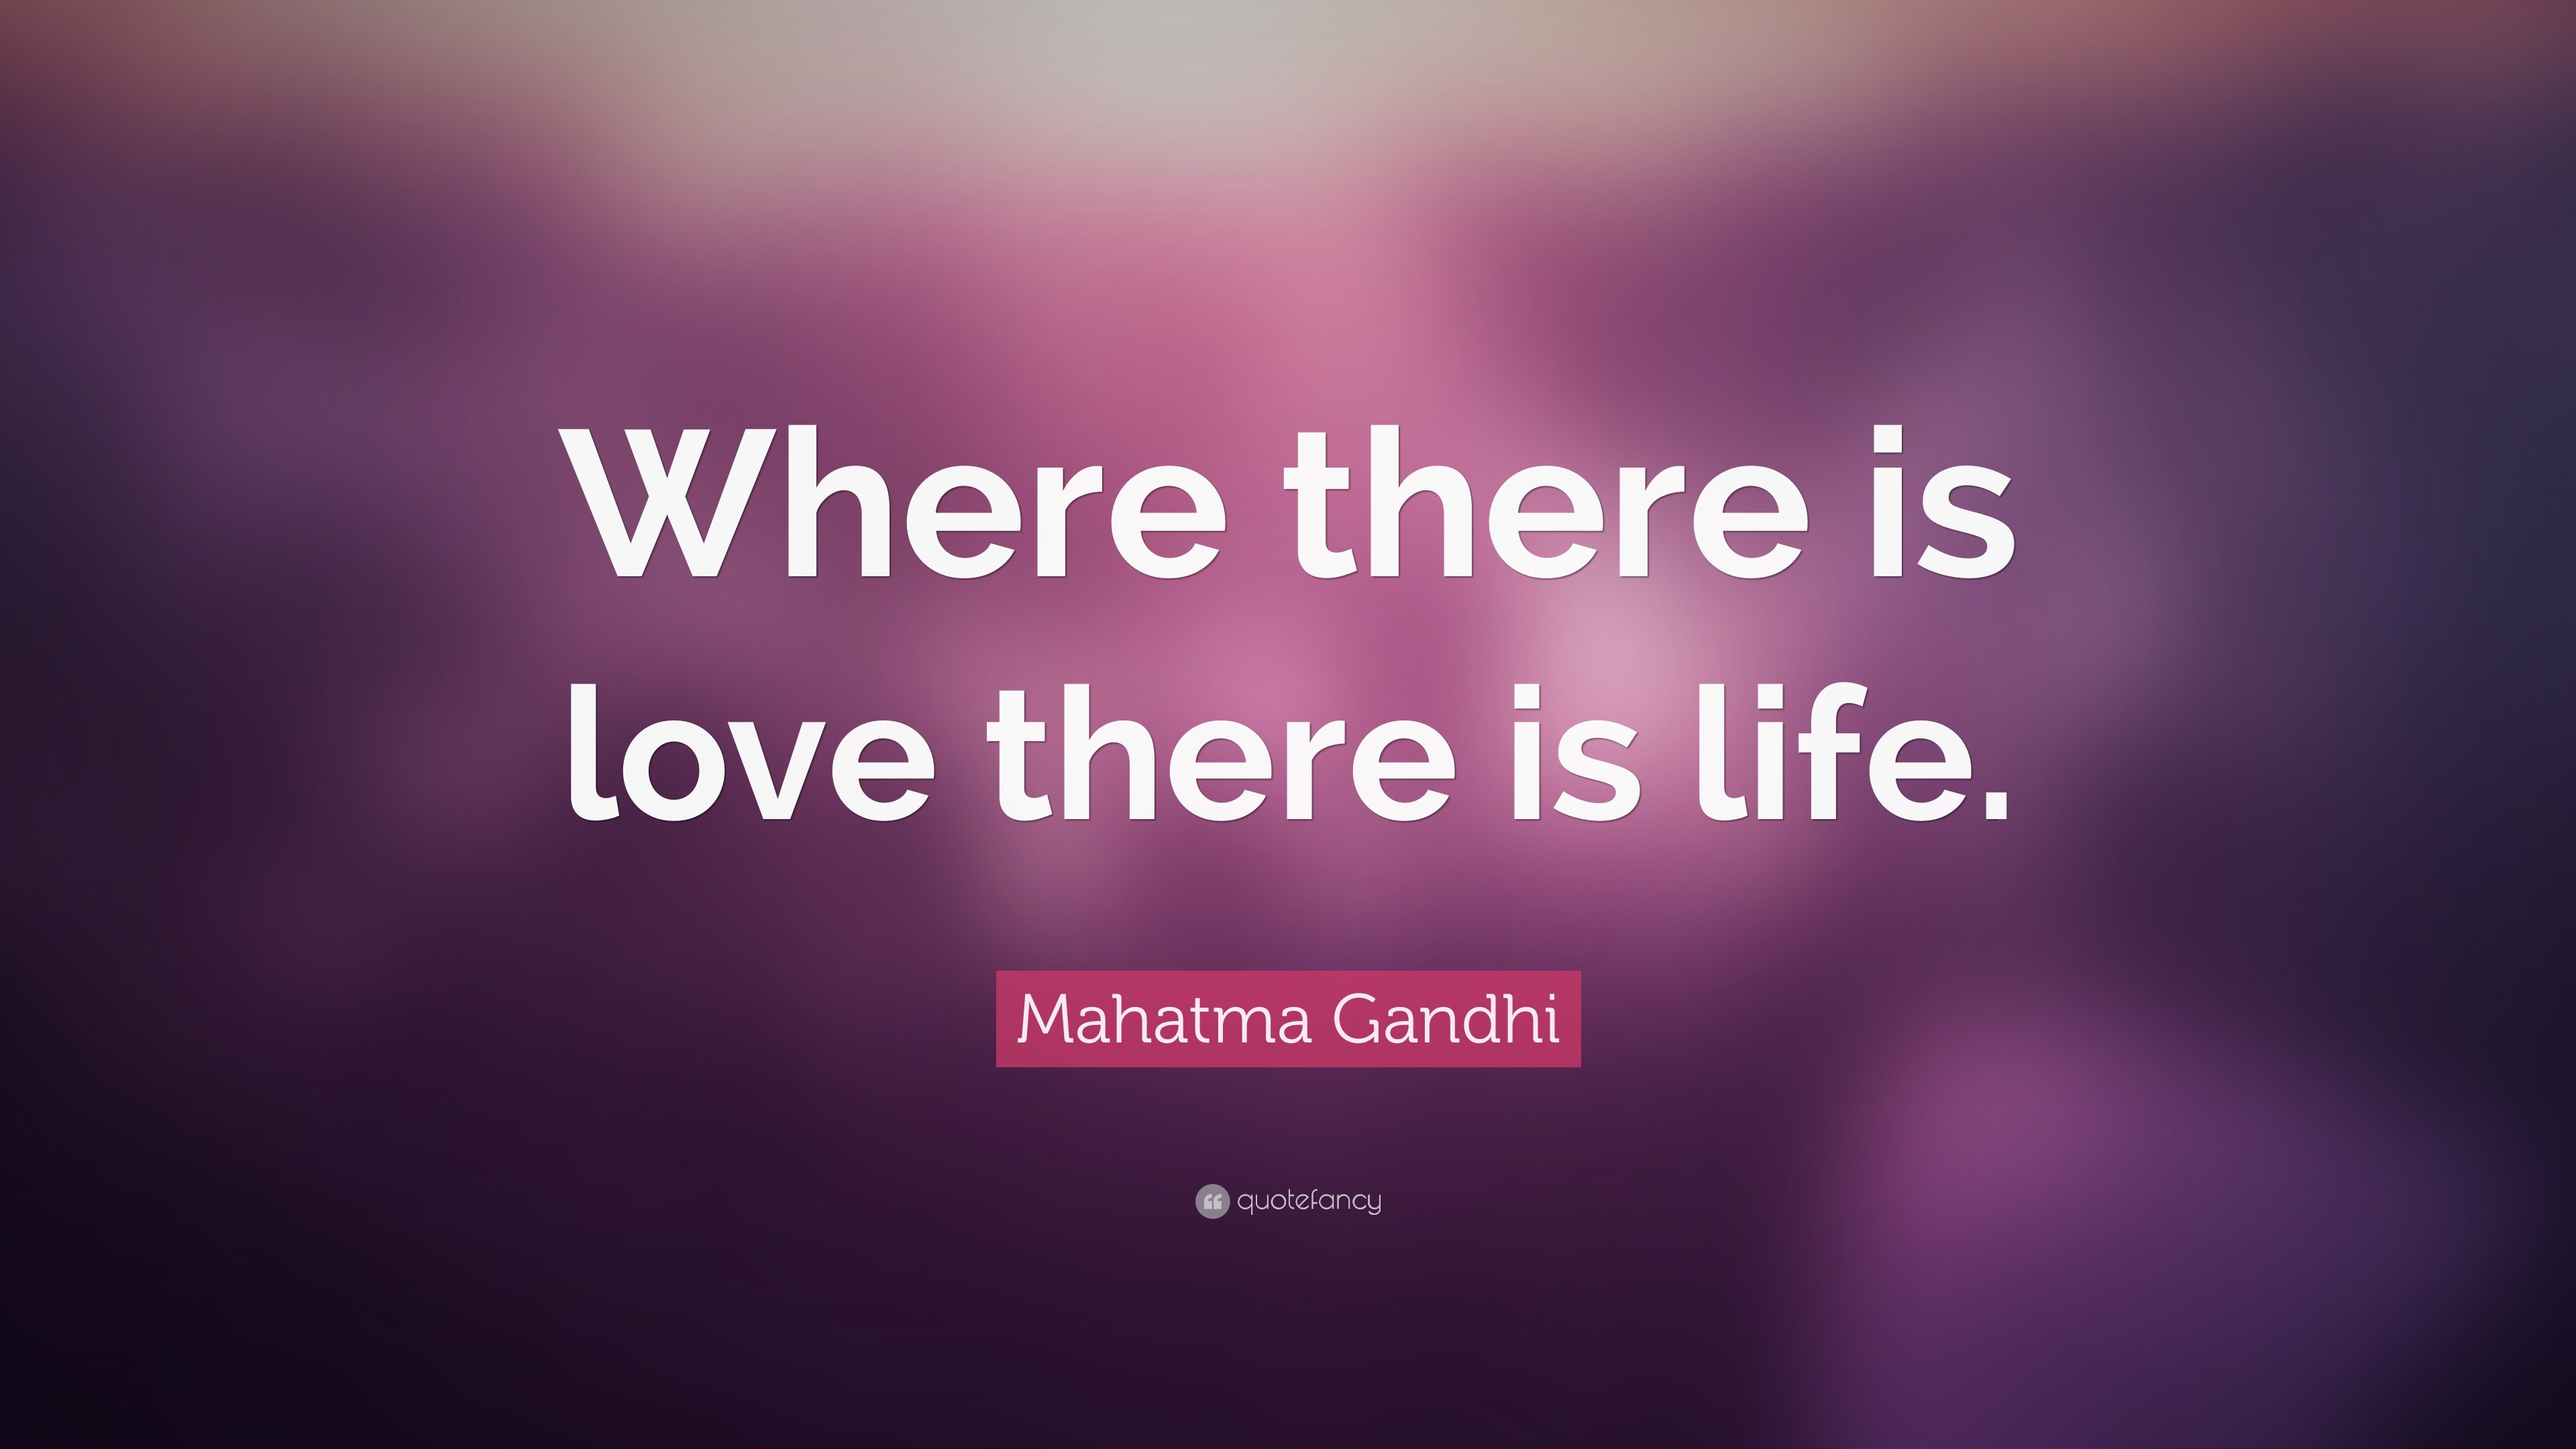 Mahatma Gandhi Quote “Where there is love there is life ”